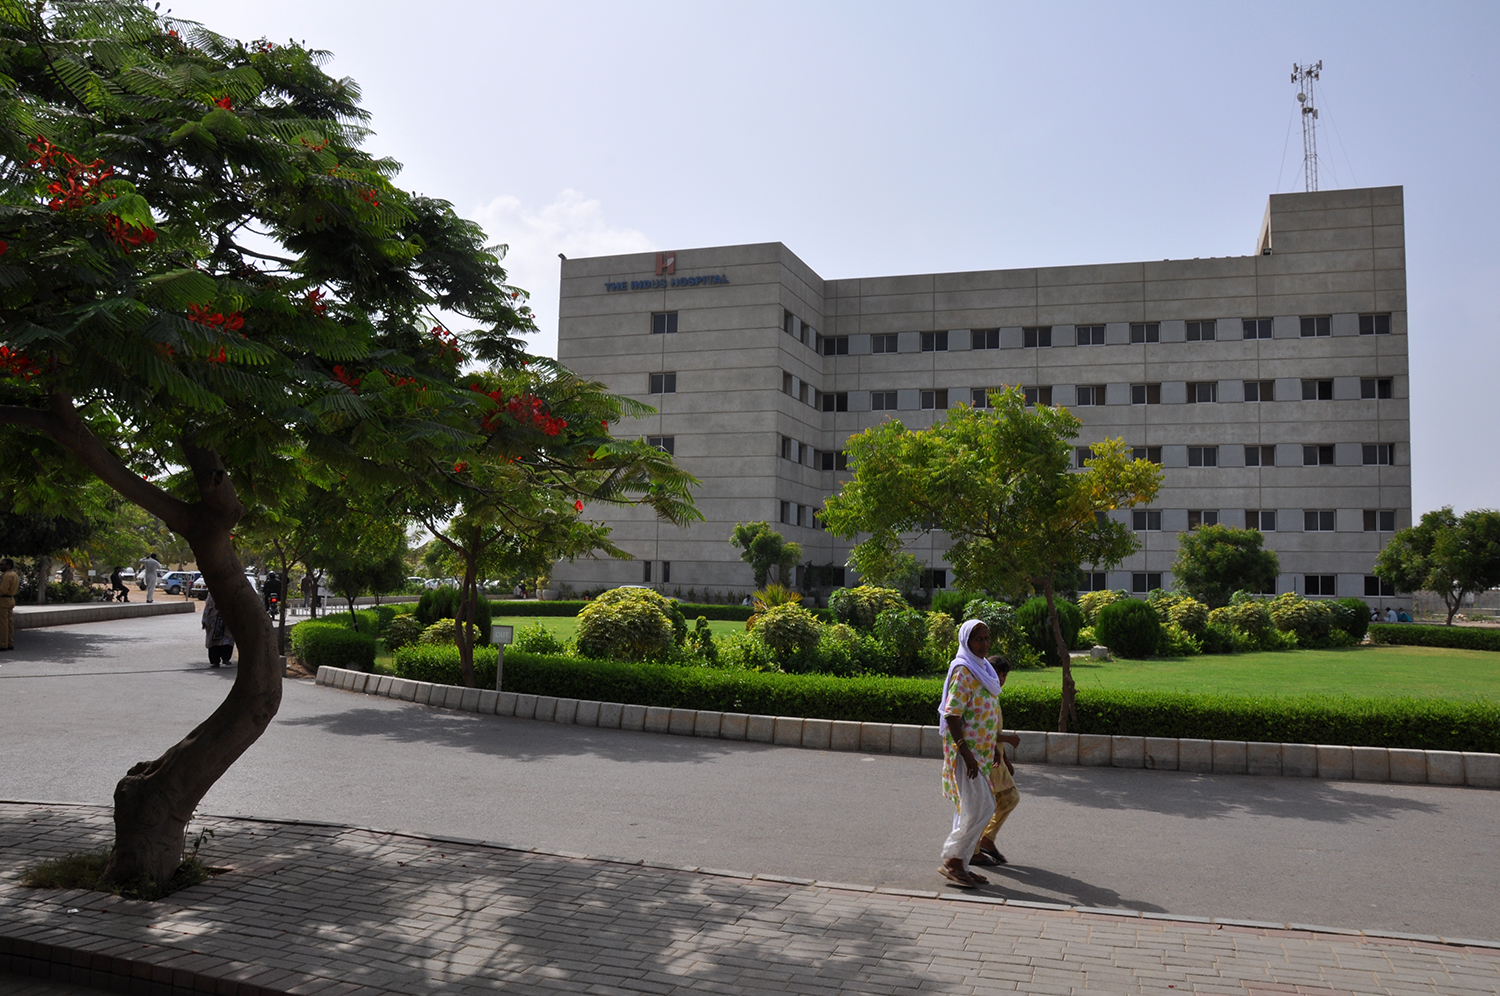 The Indus Hospital (TIH) building